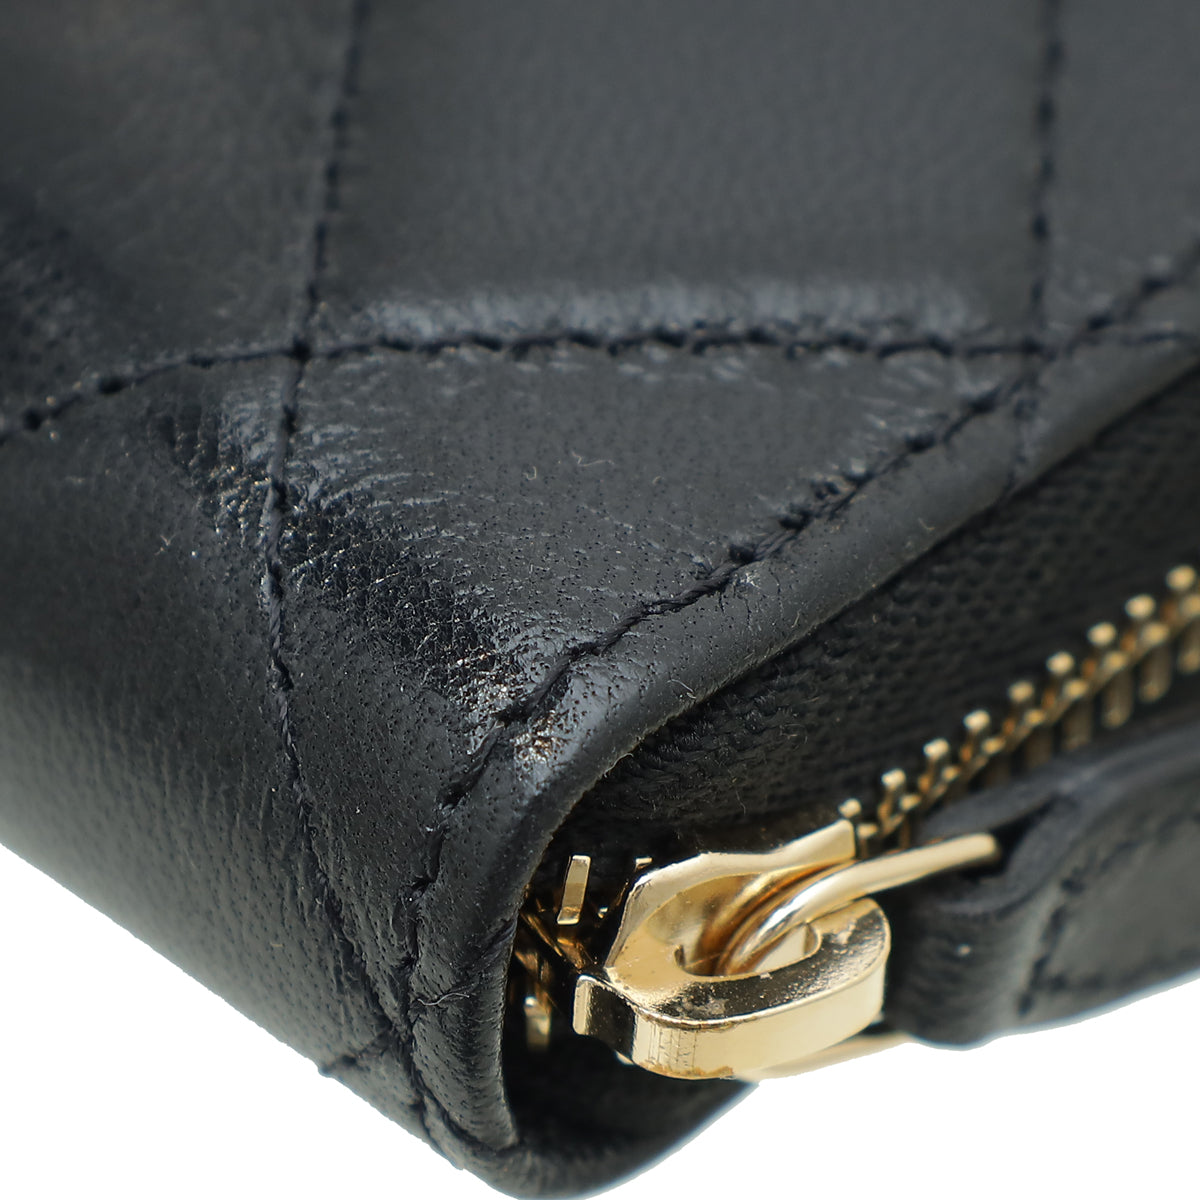 Chanel Black CC Quilted Zipped Wallet